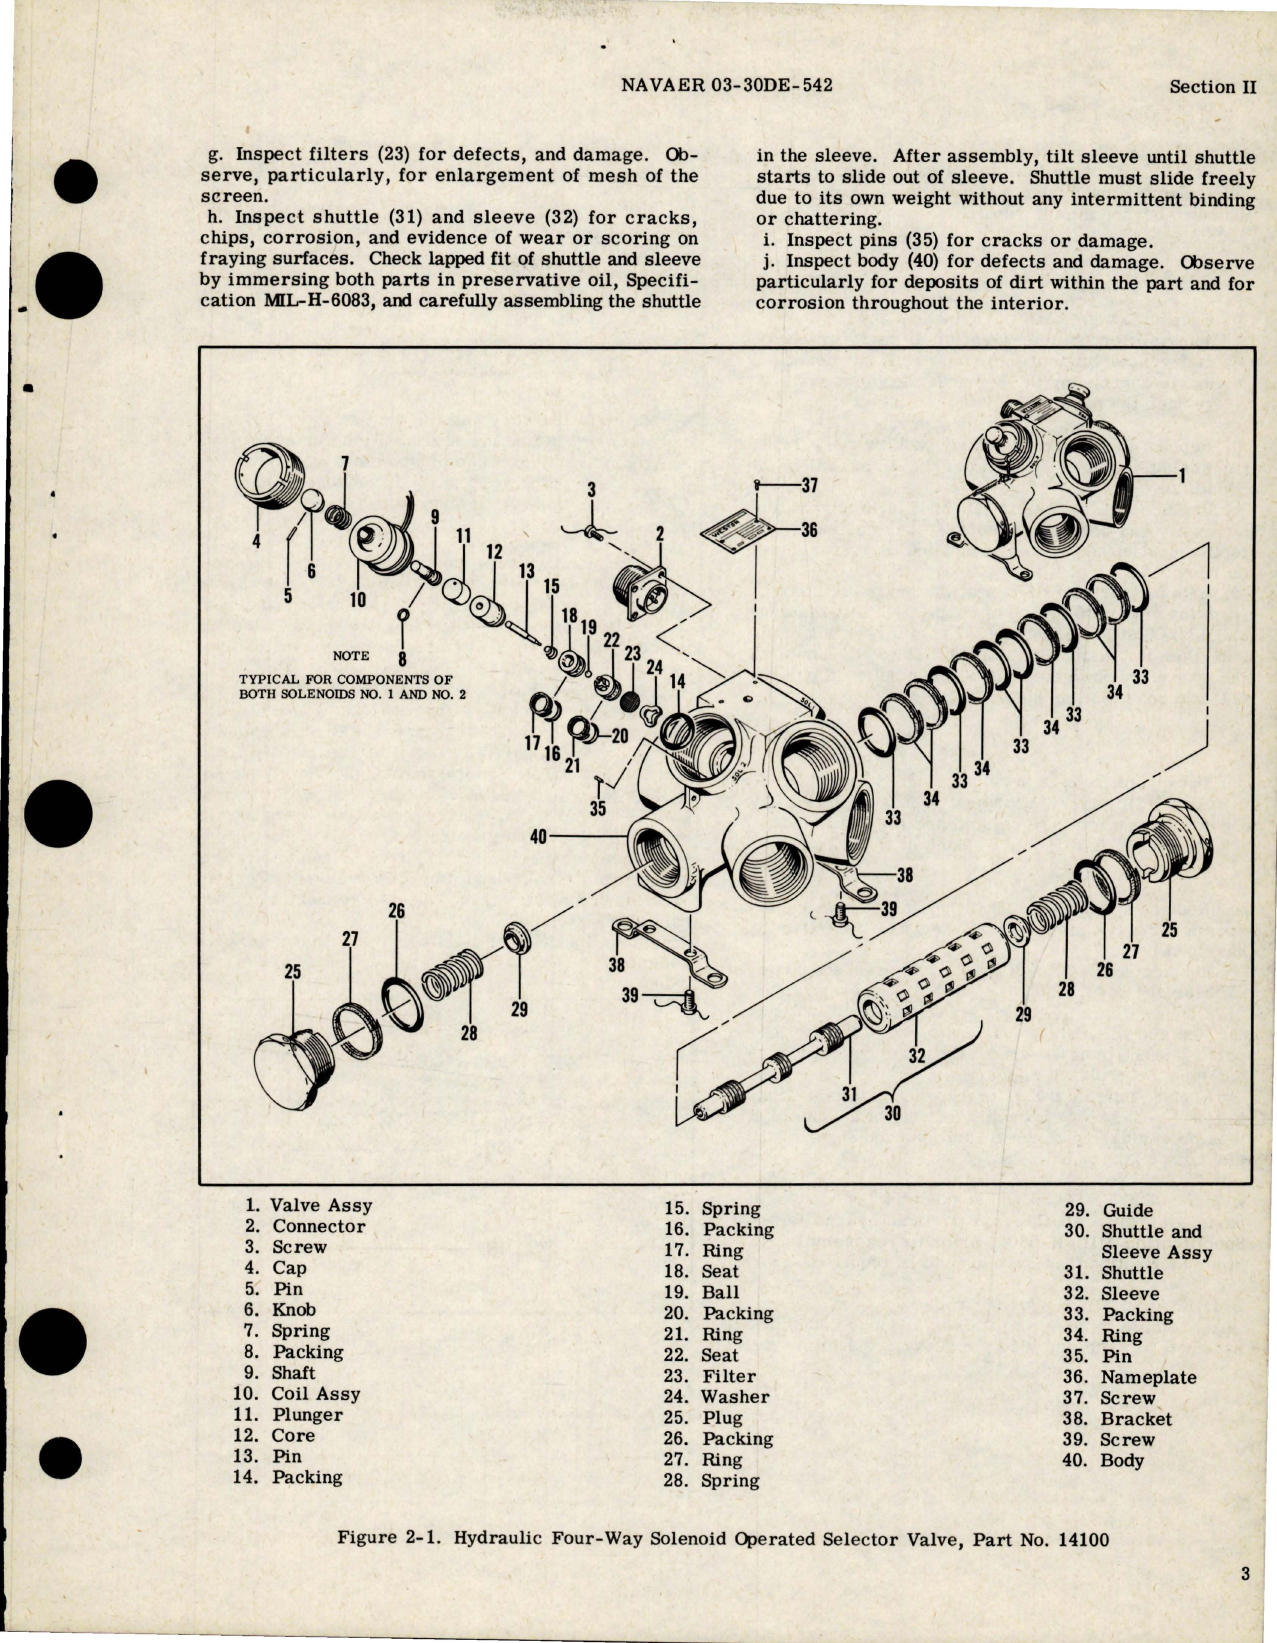 Sample page 7 from AirCorps Library document: Overhaul Instructions for Hydraulic Four-Way Solenoid Operated Selector Valves - Parts 14100 and 15130 